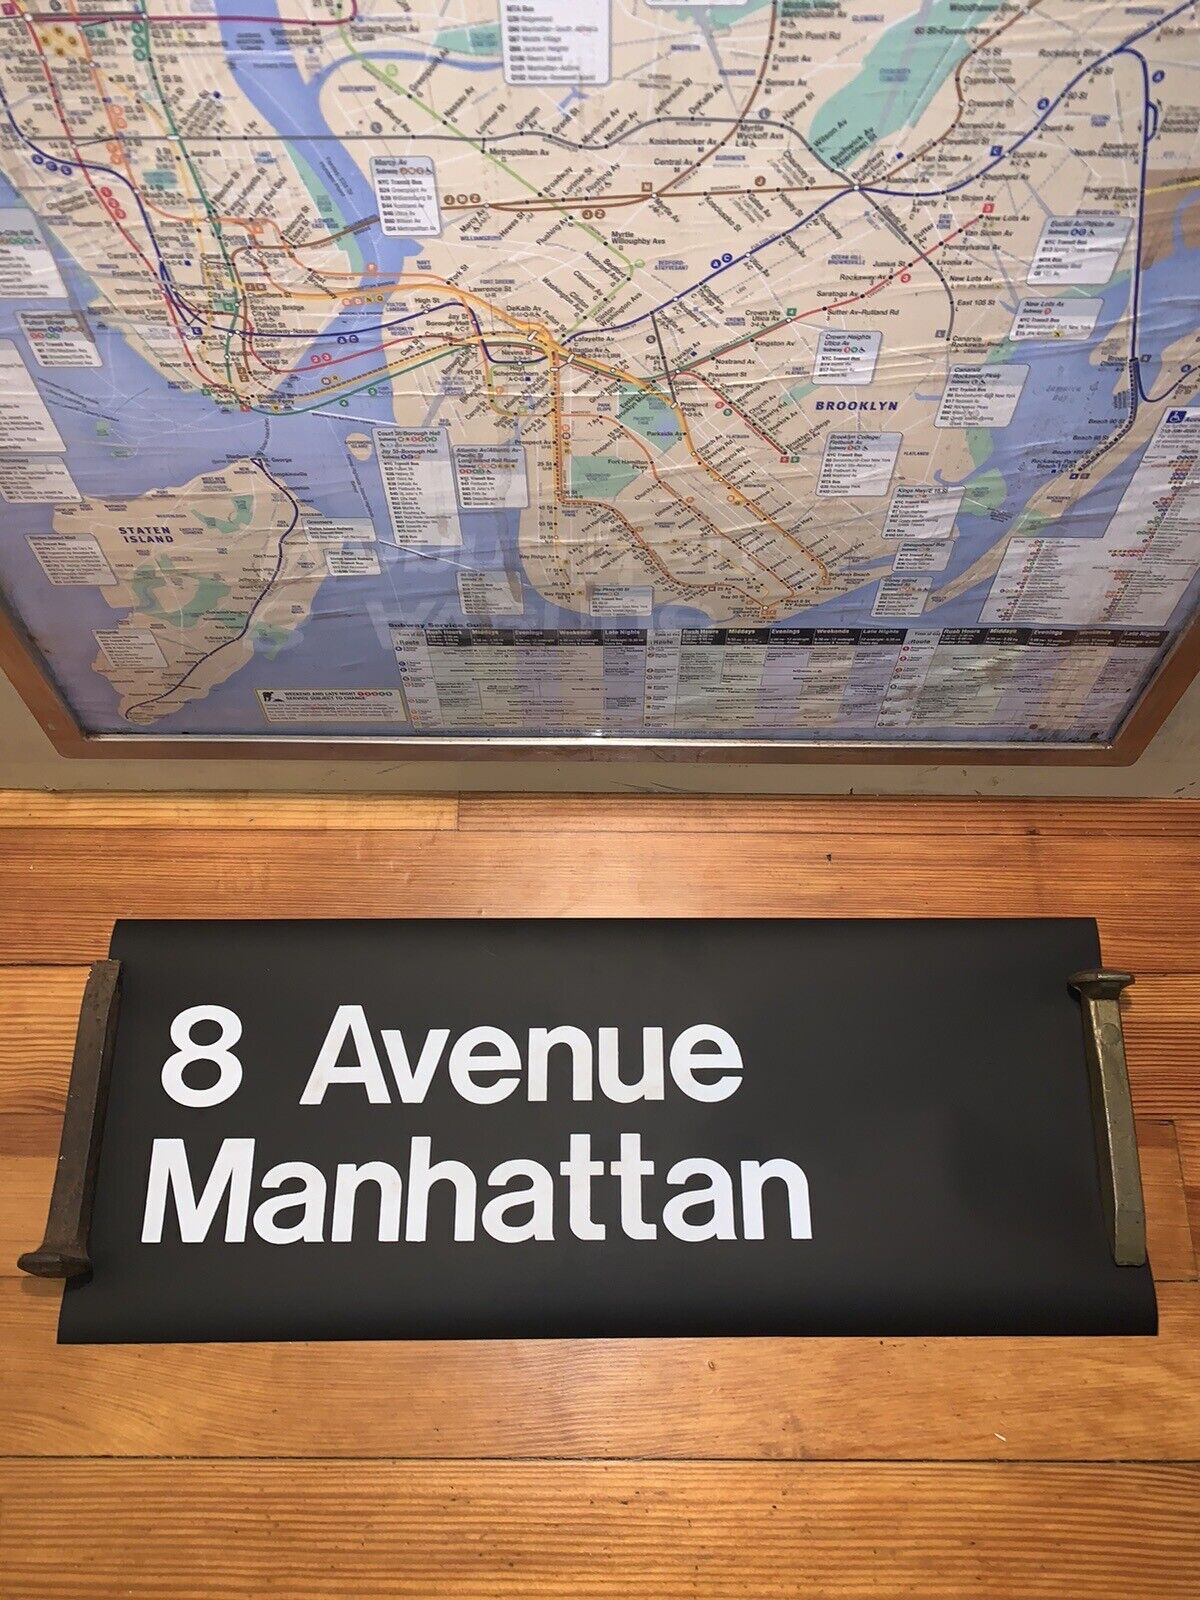 R32 NY NYC SUBWAY ROLL SIGN 8th AVENUE MANHATTAN HELLS KITCHEN MEATPACKING DIST.